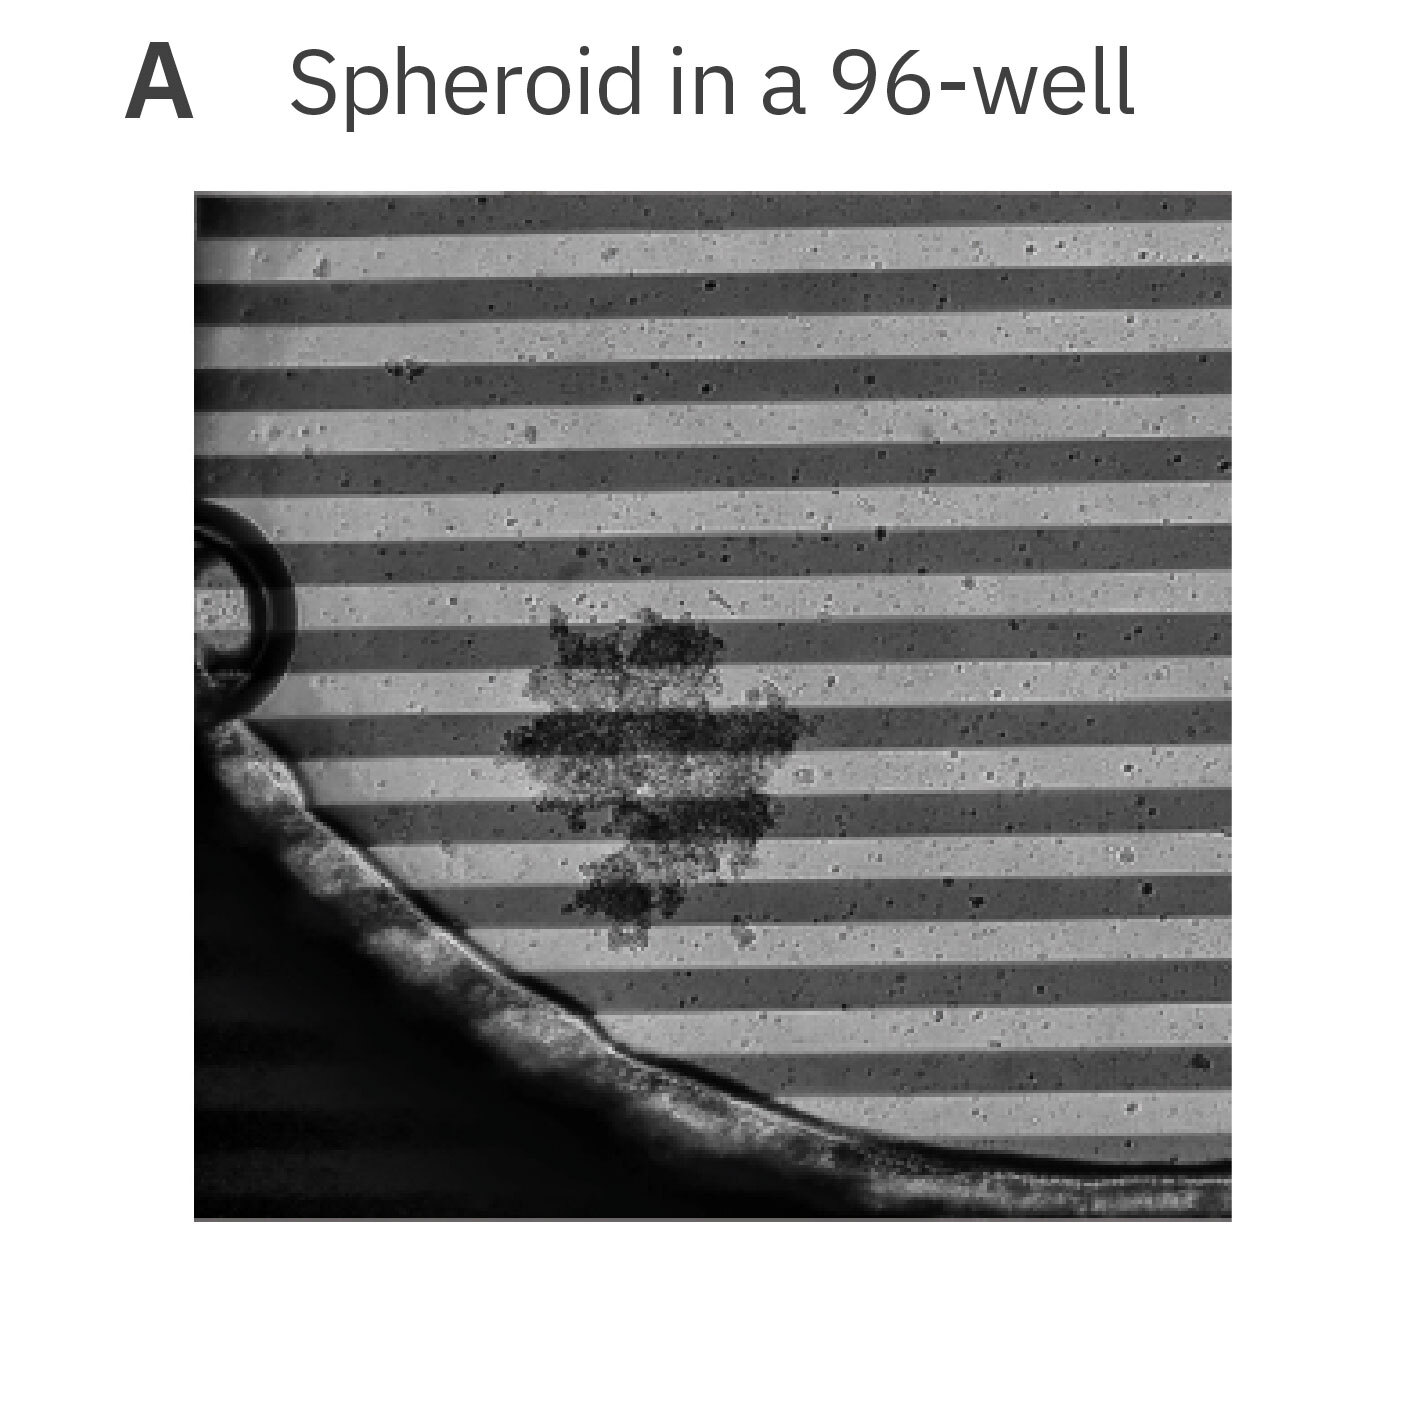 Cancer Spheroid imaged in a CytoView-Z impedance well bottom